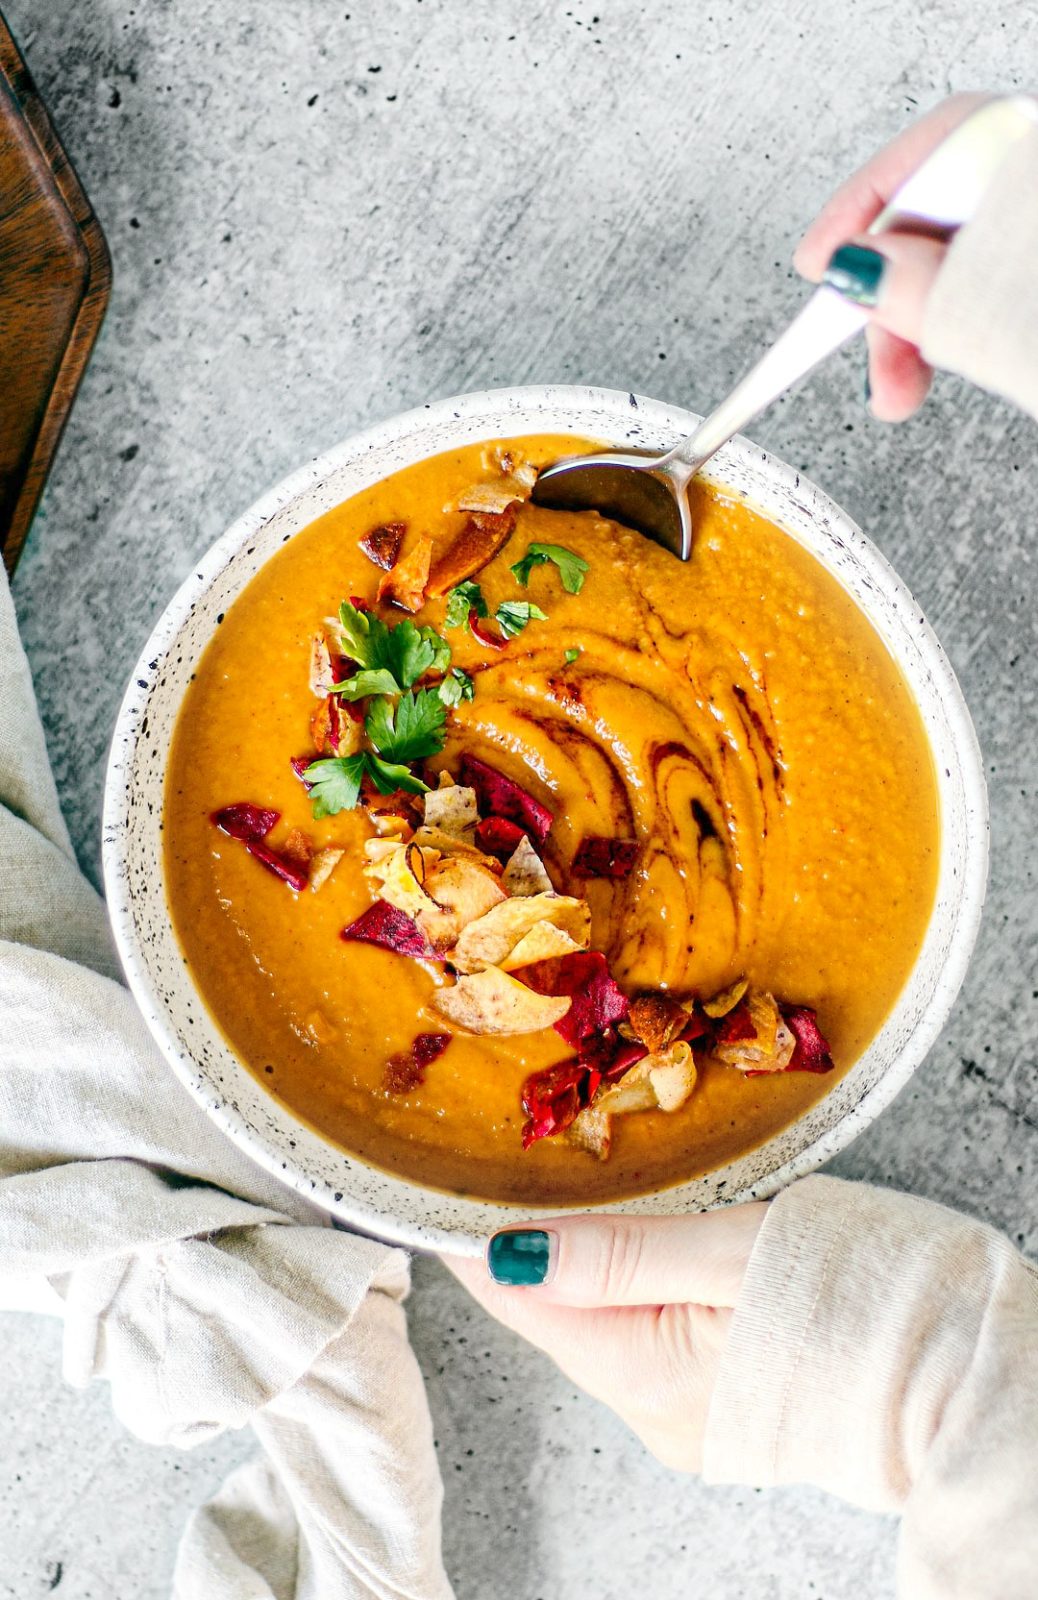 Hands holding bowl of sweet potato soup.